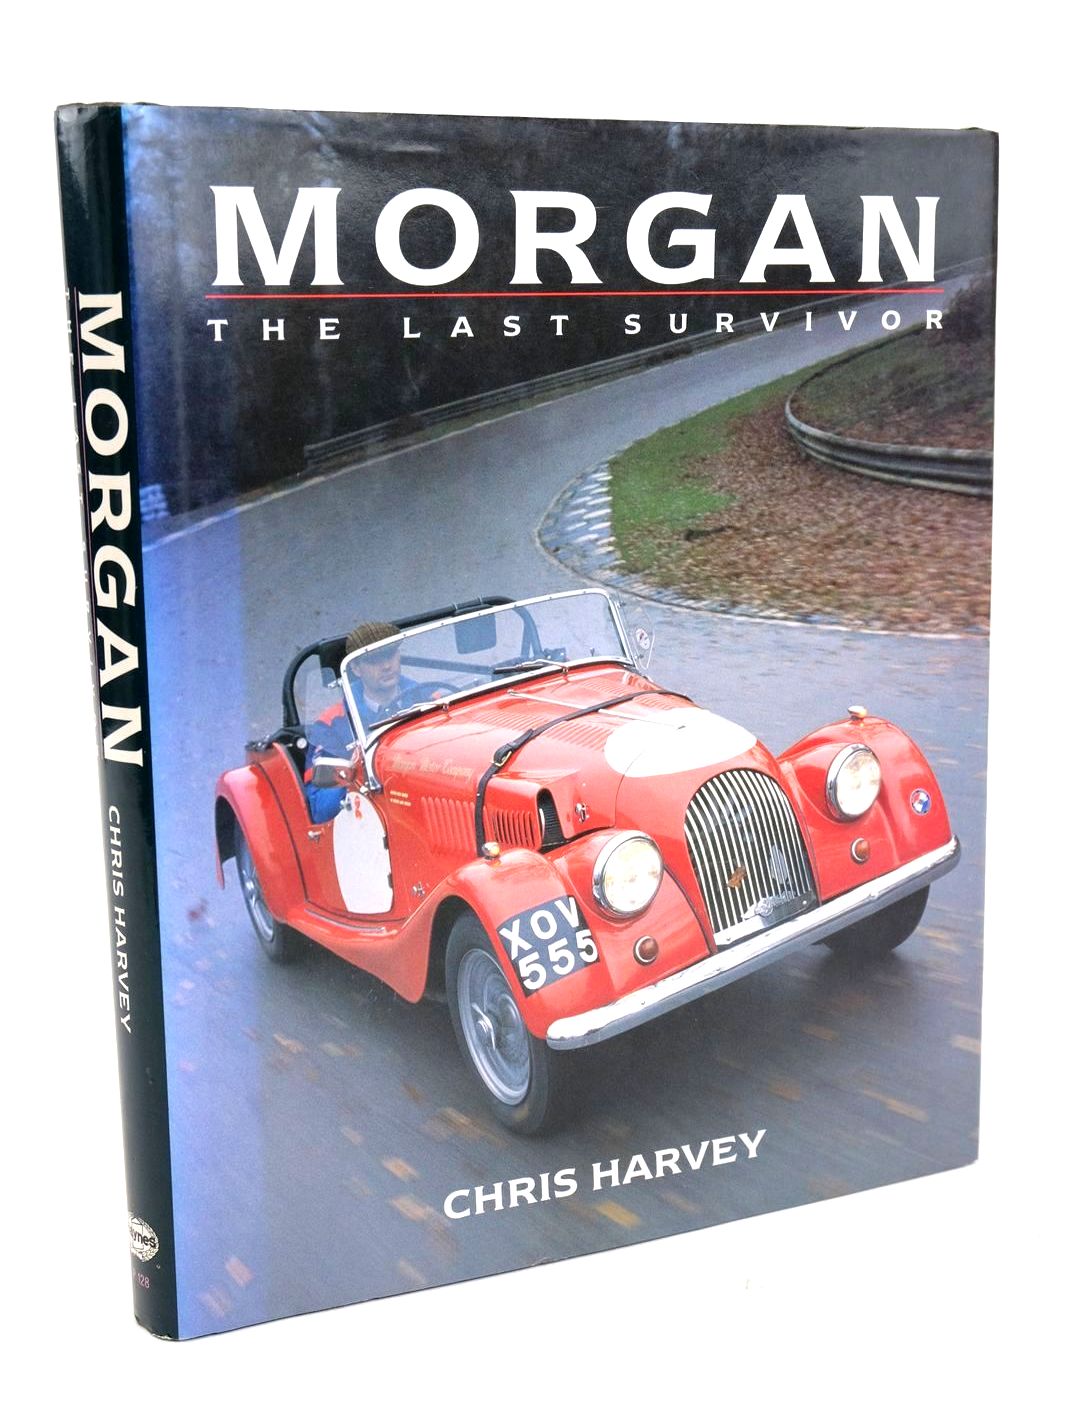 Photo of MORGAN: THE LAST SURVIVOR written by Harvey, Chris published by The Oxford Illustrated Press (STOCK CODE: 1820259)  for sale by Stella & Rose's Books